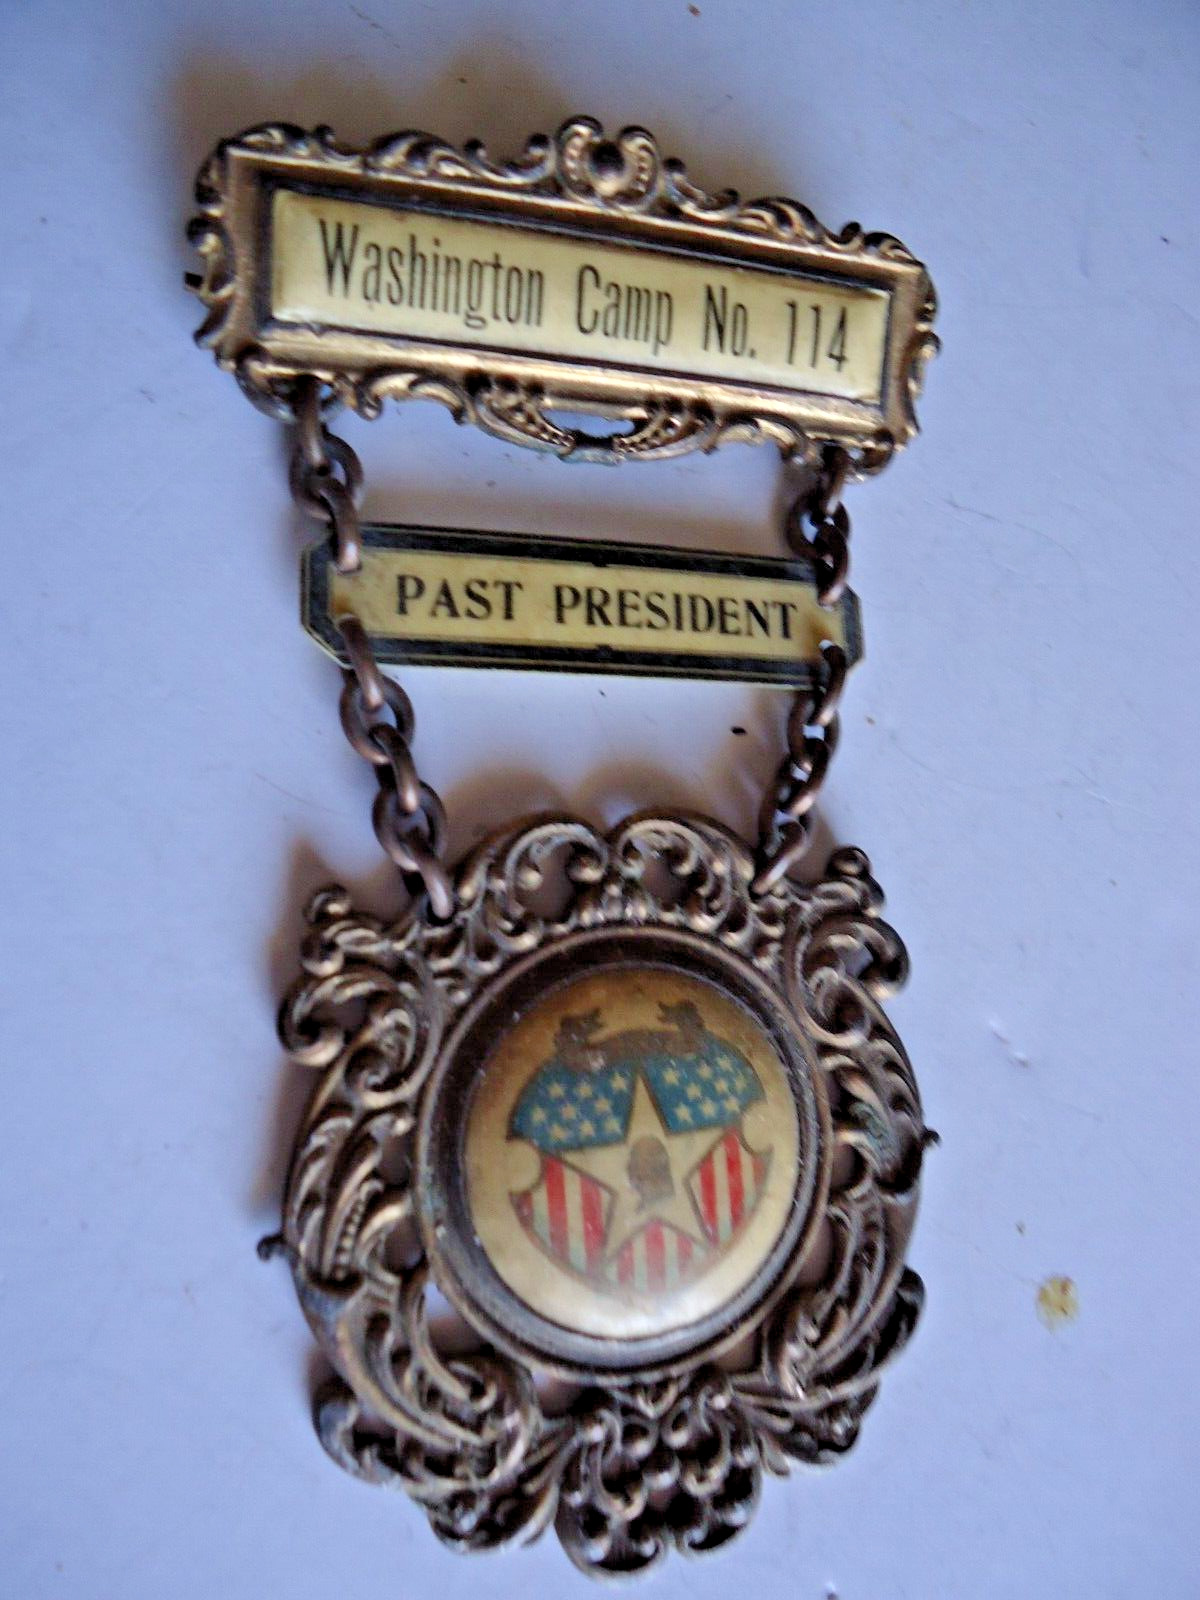 Antique Fraternal Badge / Medal POSA P.O.S. of A. Washington Camp PAST PRESIDENT